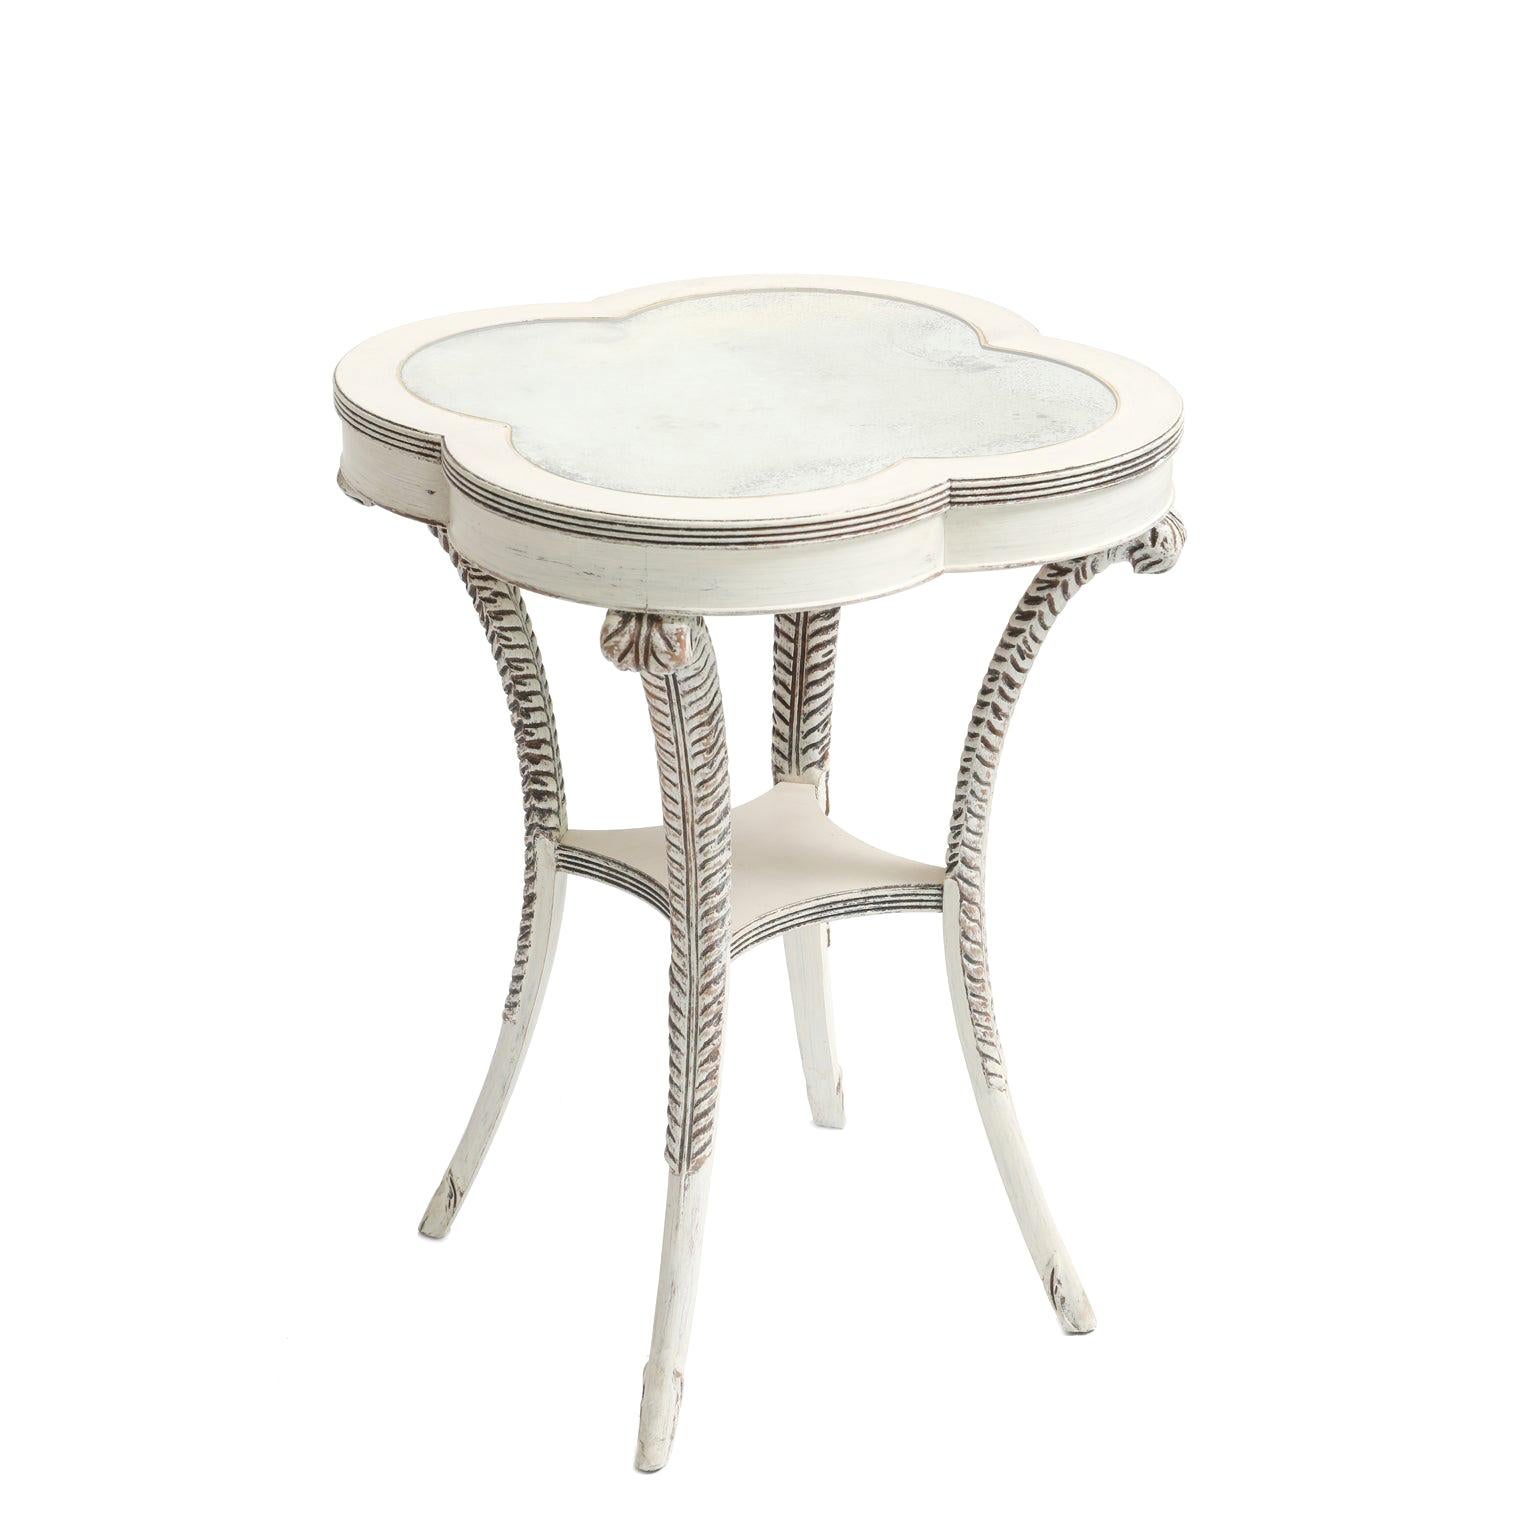 Painted Occasional Table with Mirrored Top on Plume-Carved Legs